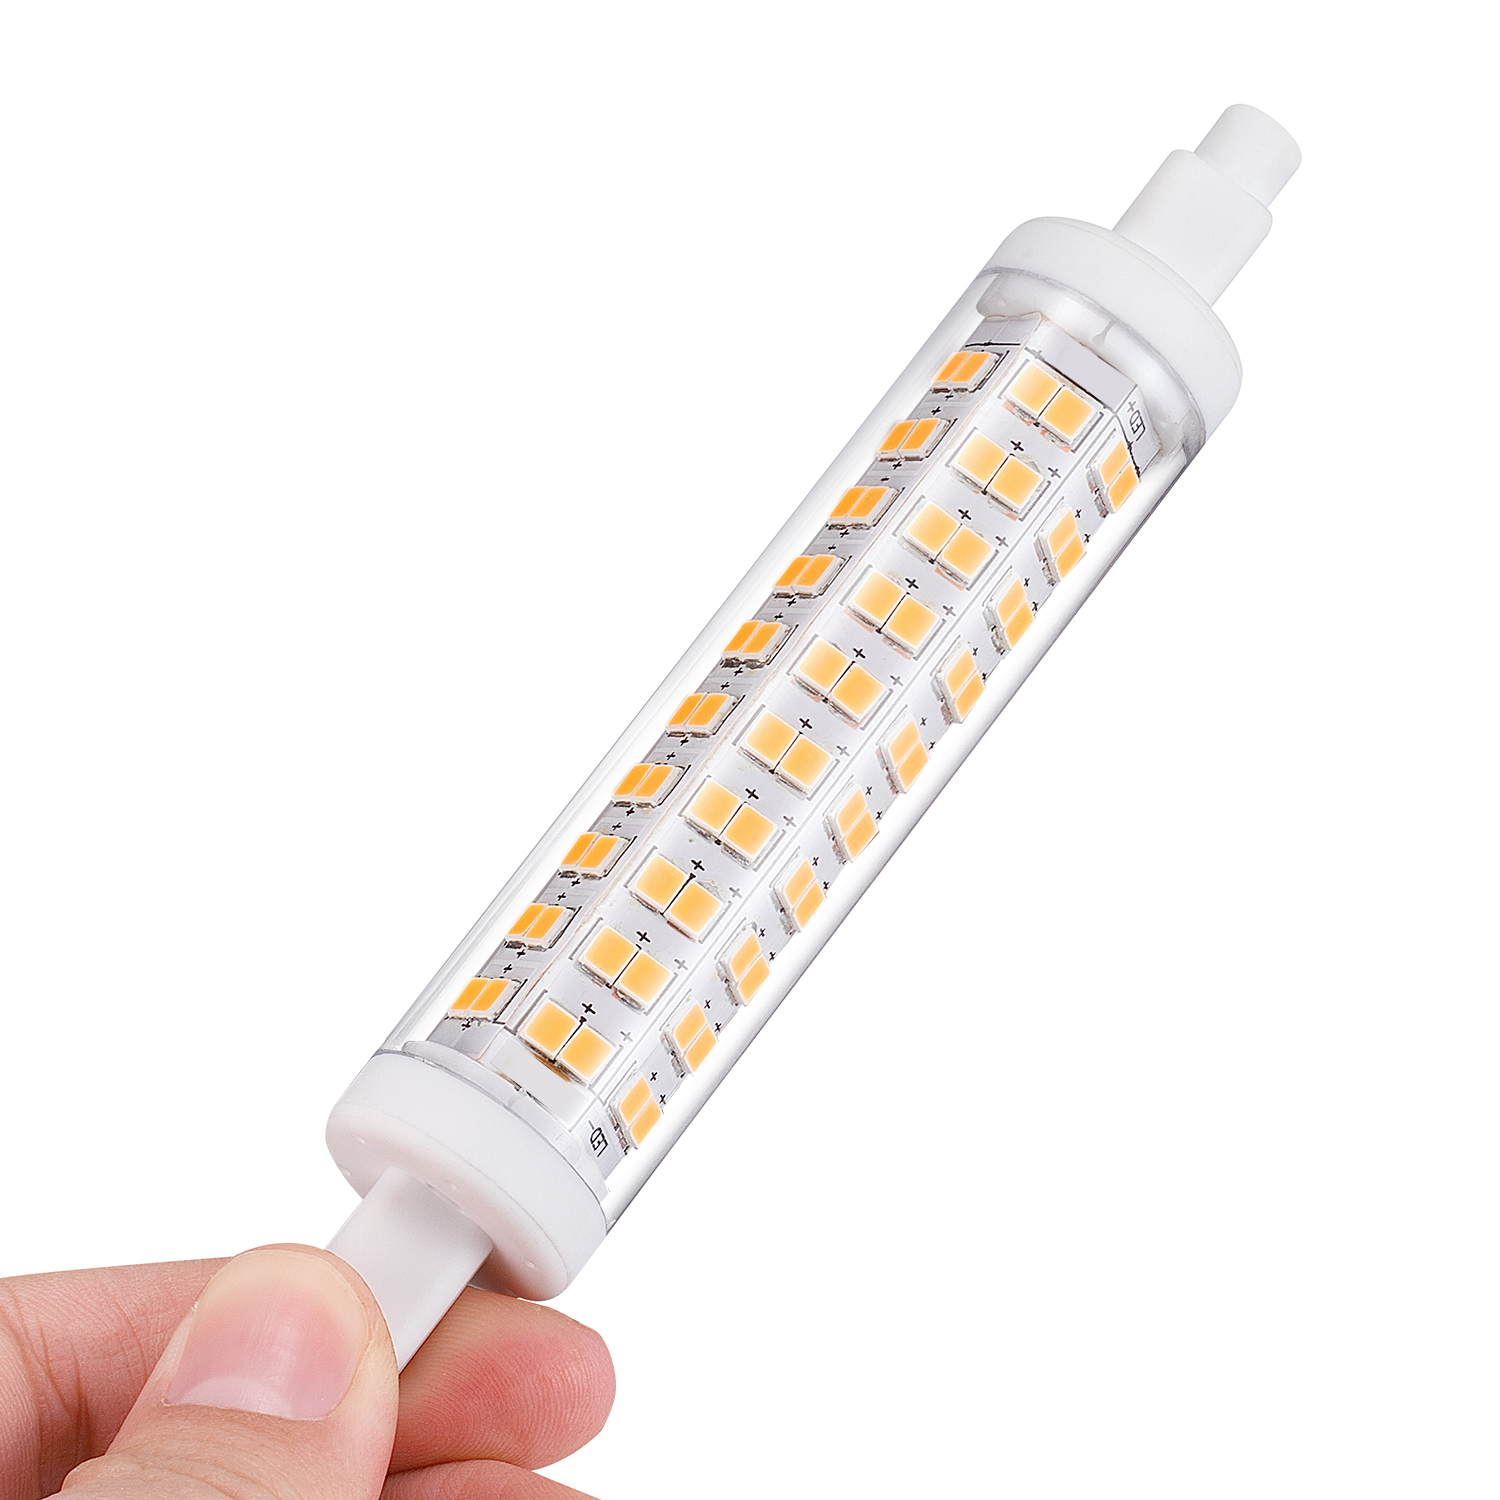 LumenBasic R7S LED 118mm Bulb J118 10w Ended J Type Replacement for Halogen Flood Lamp 100w Equal Pack of 2 - LumenBasic